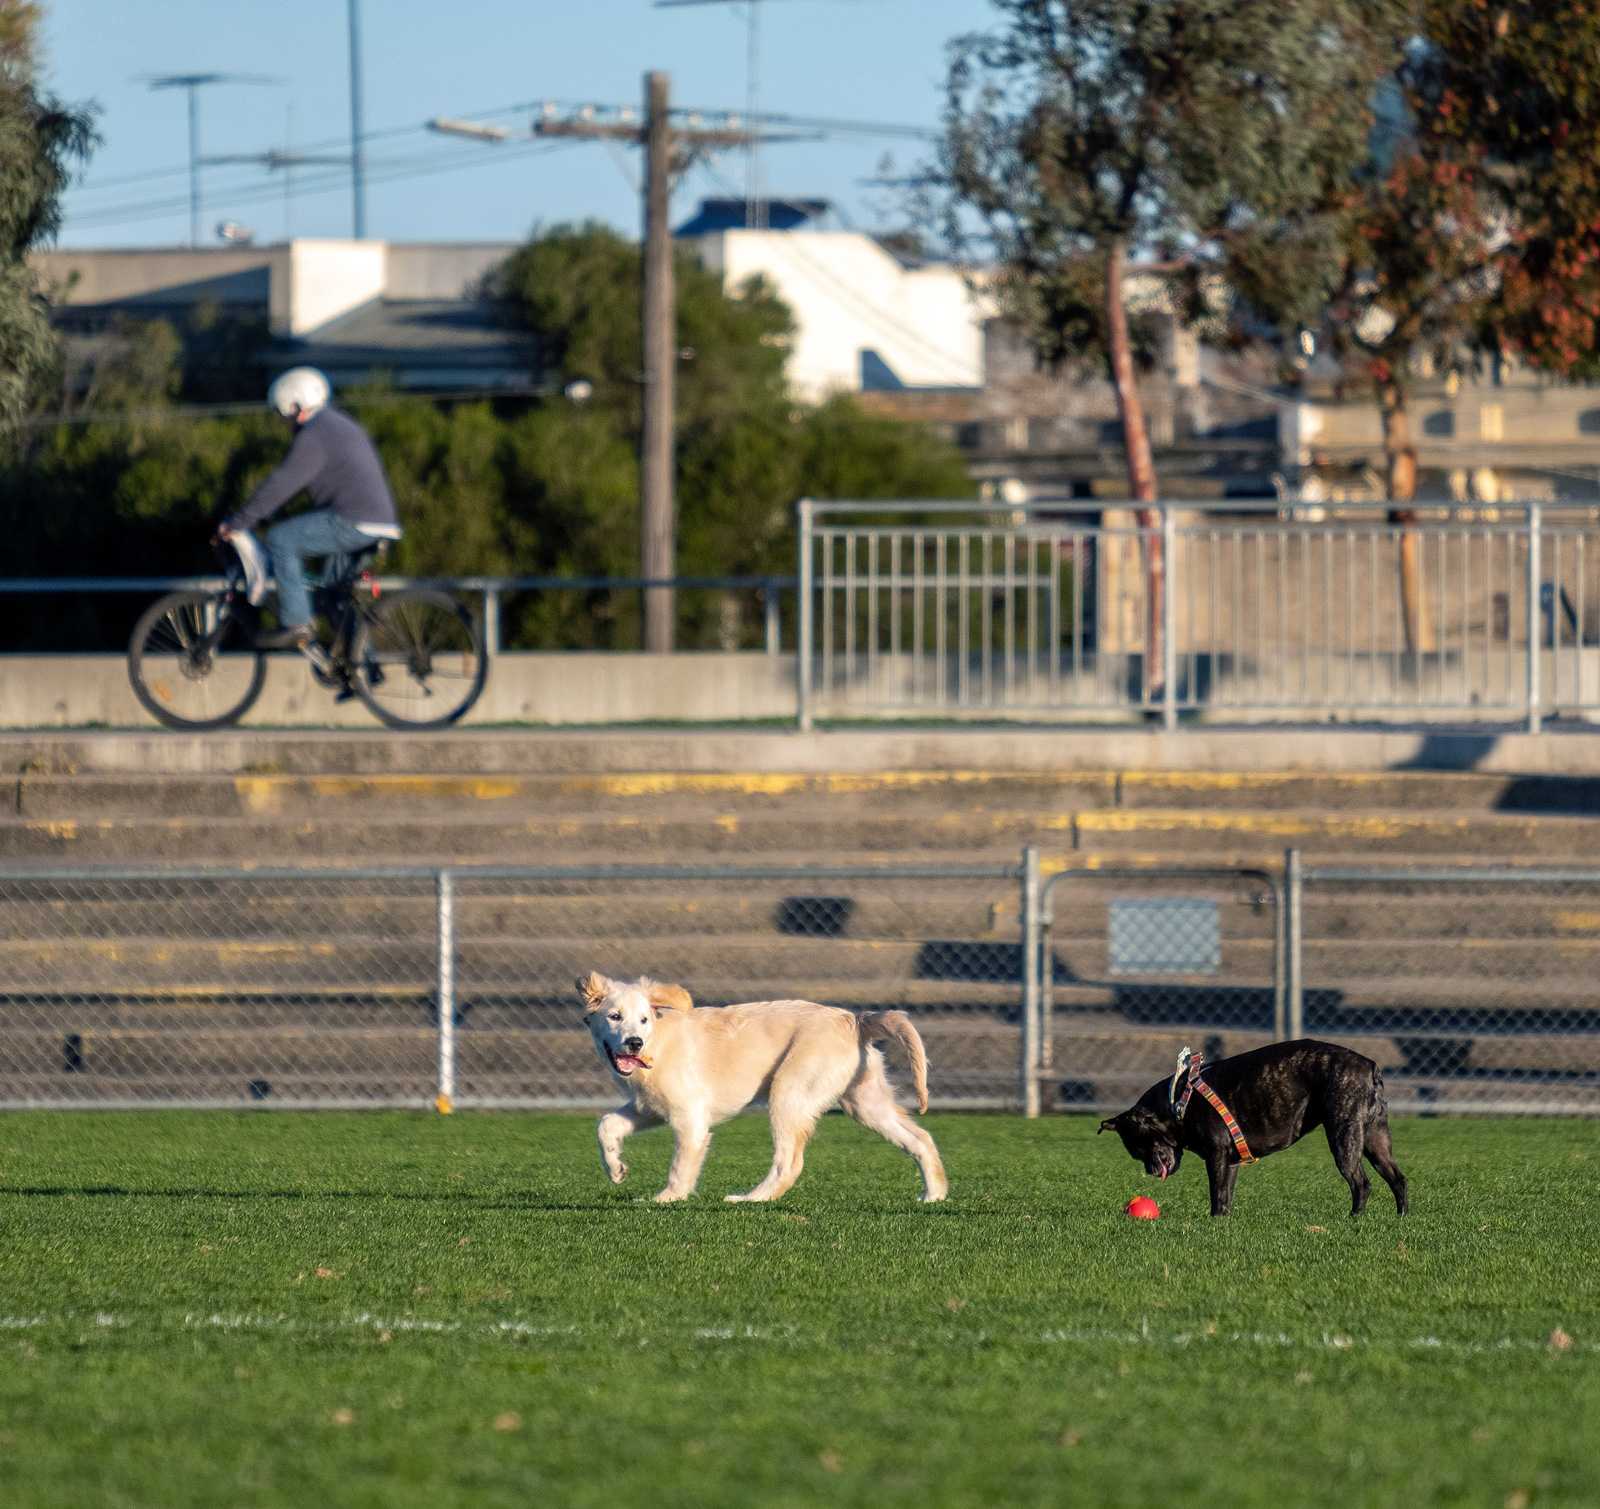 Photo of two dogs playing with a ball in foreground with a bike rider in the background